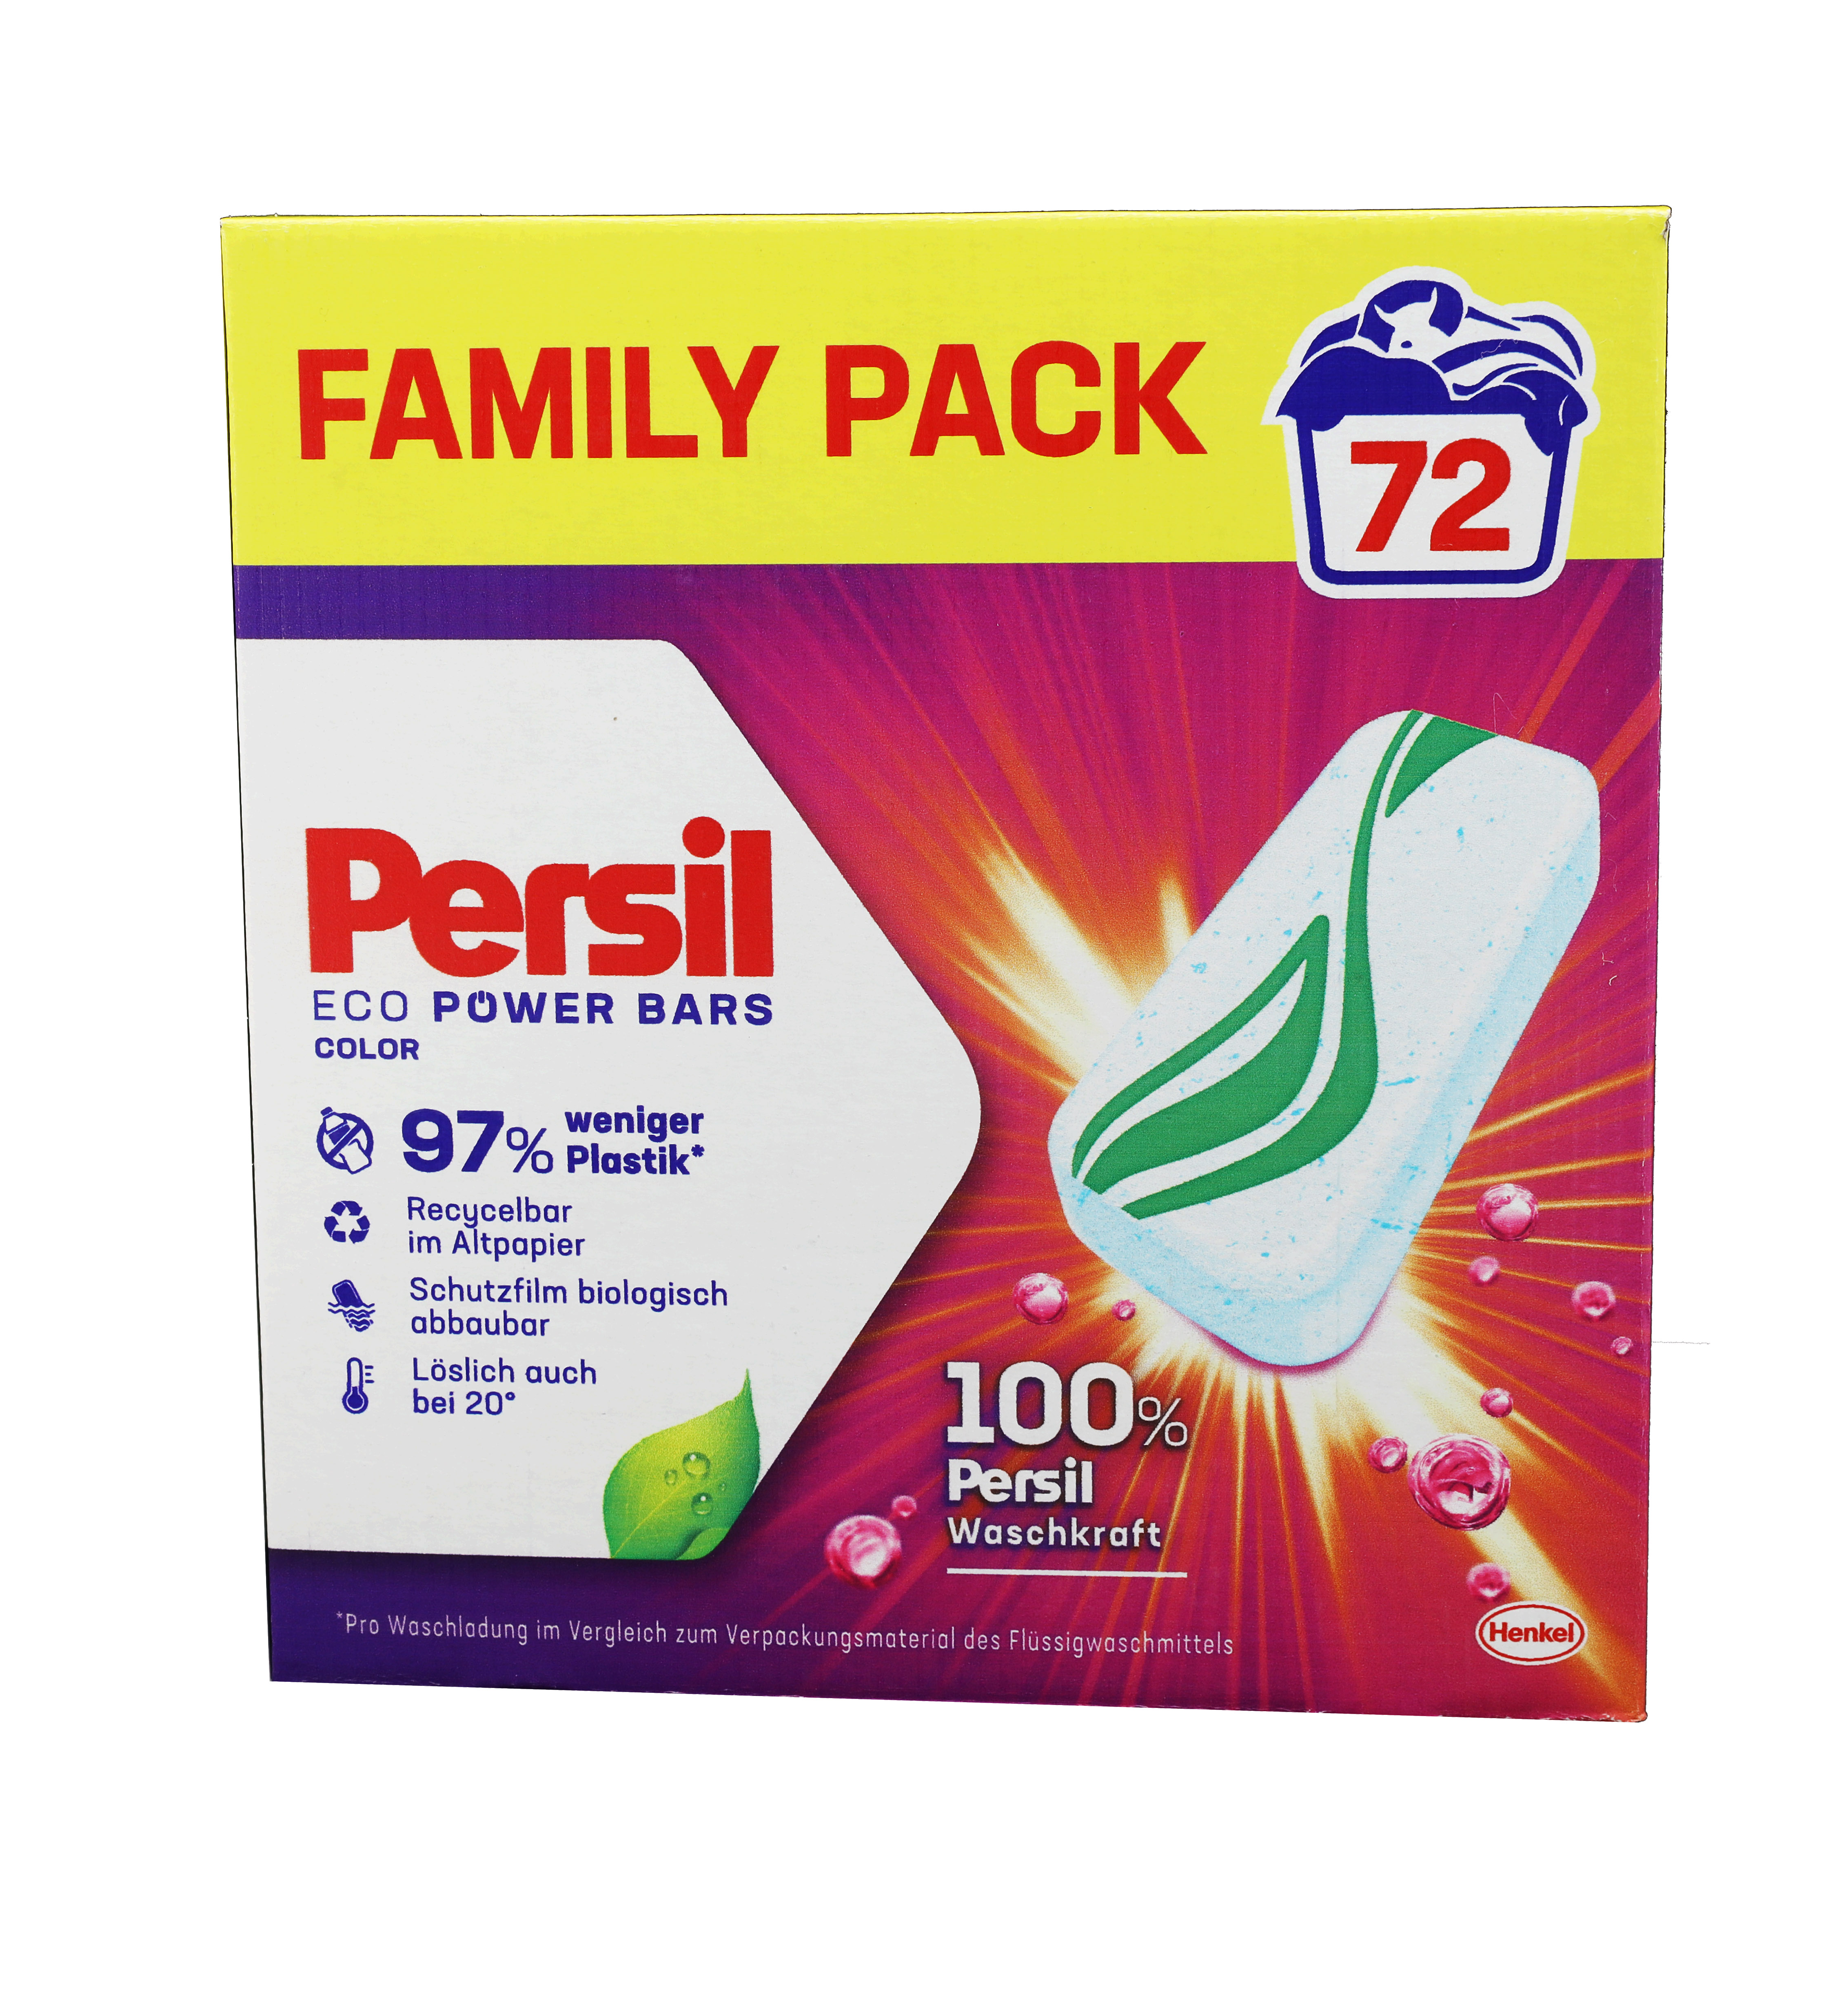 Persil Waschmittel Color Eco Power Bars 72WL Family Pack